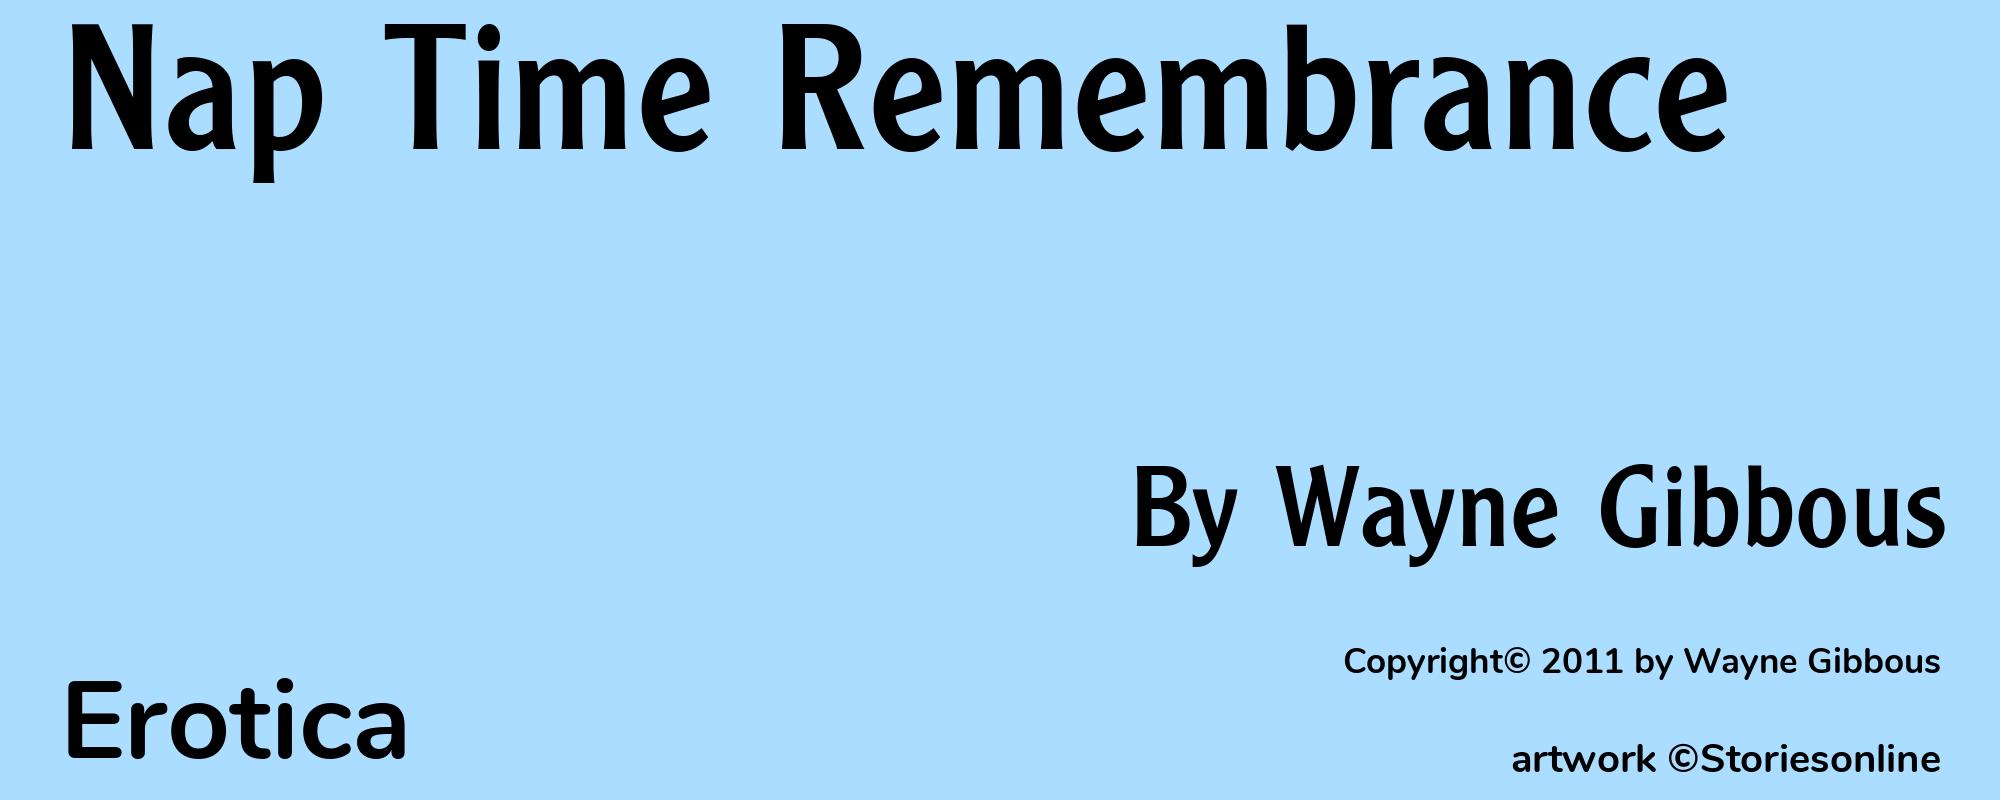 Nap Time Remembrance - Cover